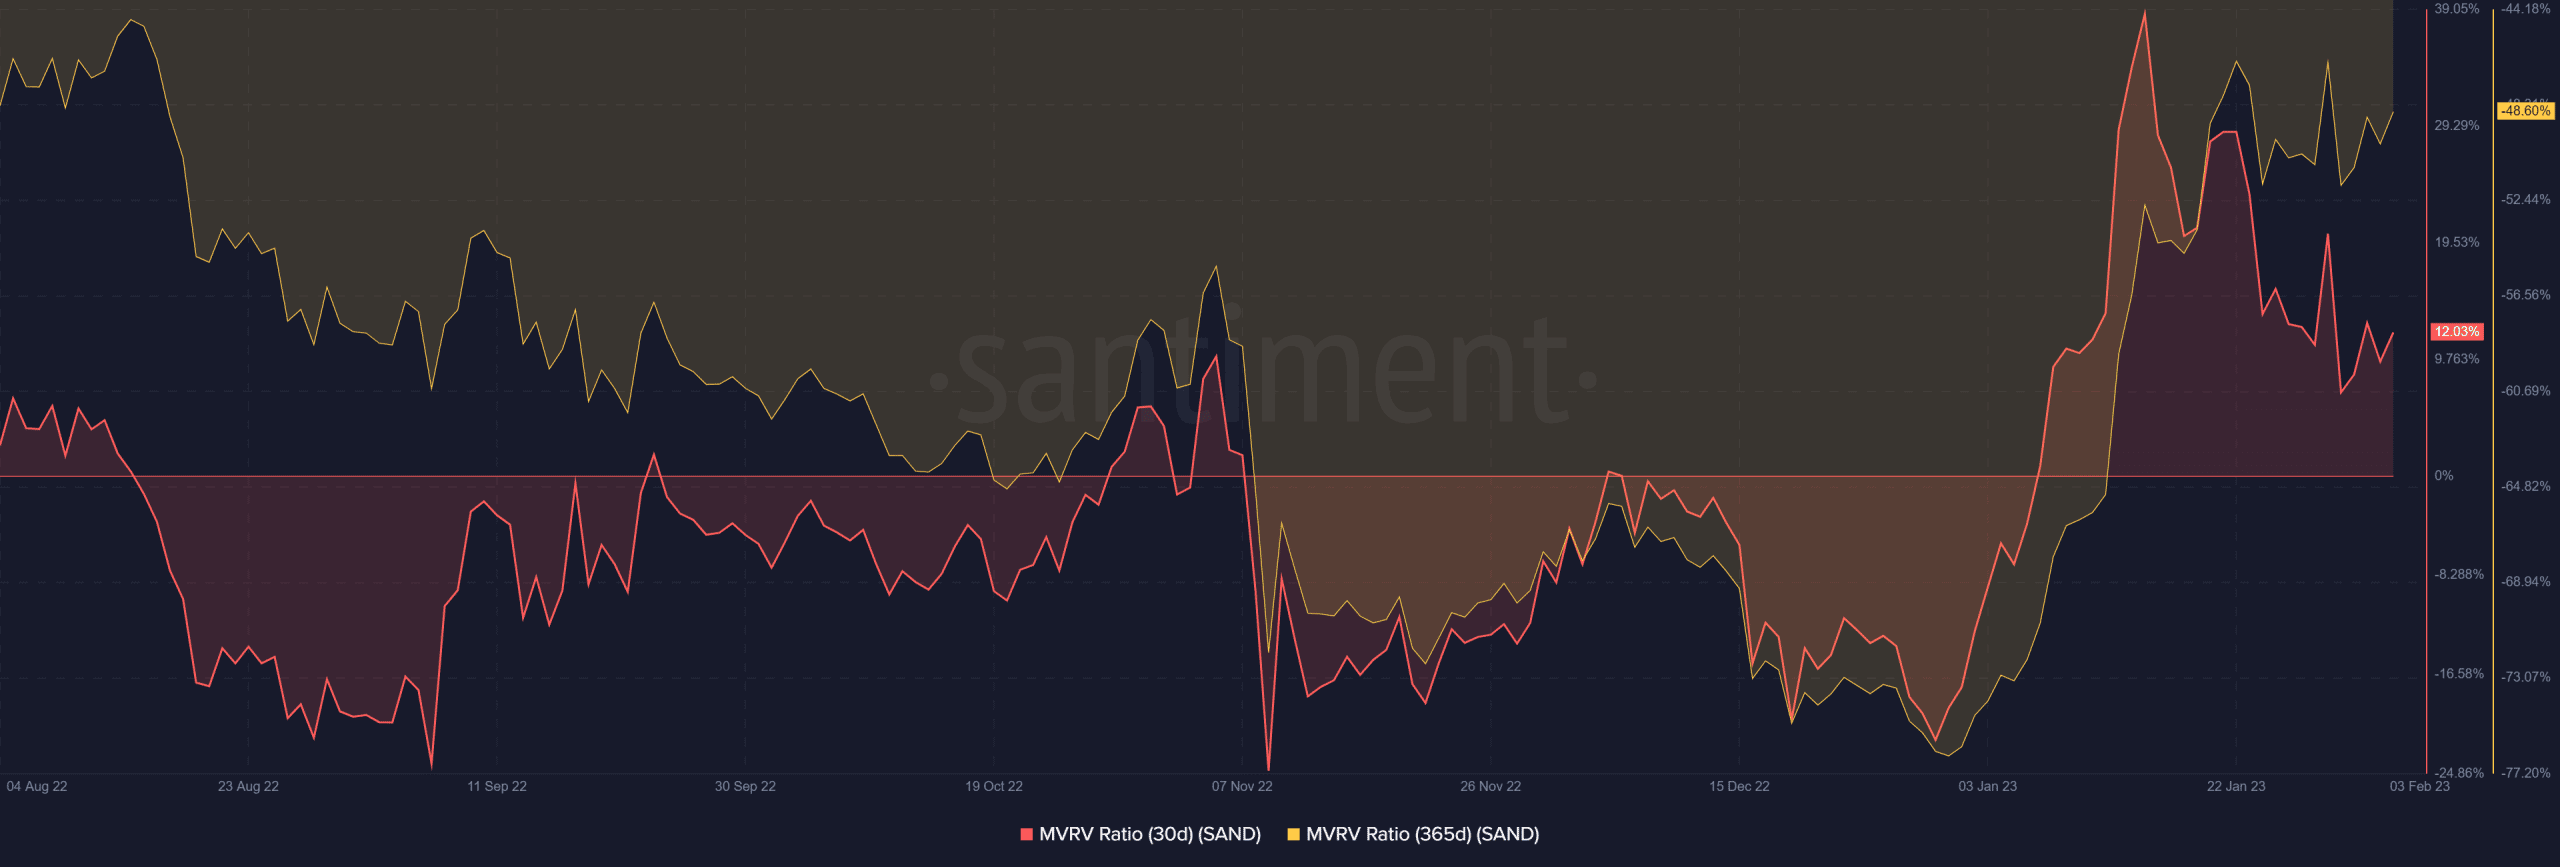 The MVRV for the last 365 days is 48.60%, while the MVRV for the last 30 days is 12.03% (Source: Santiment)